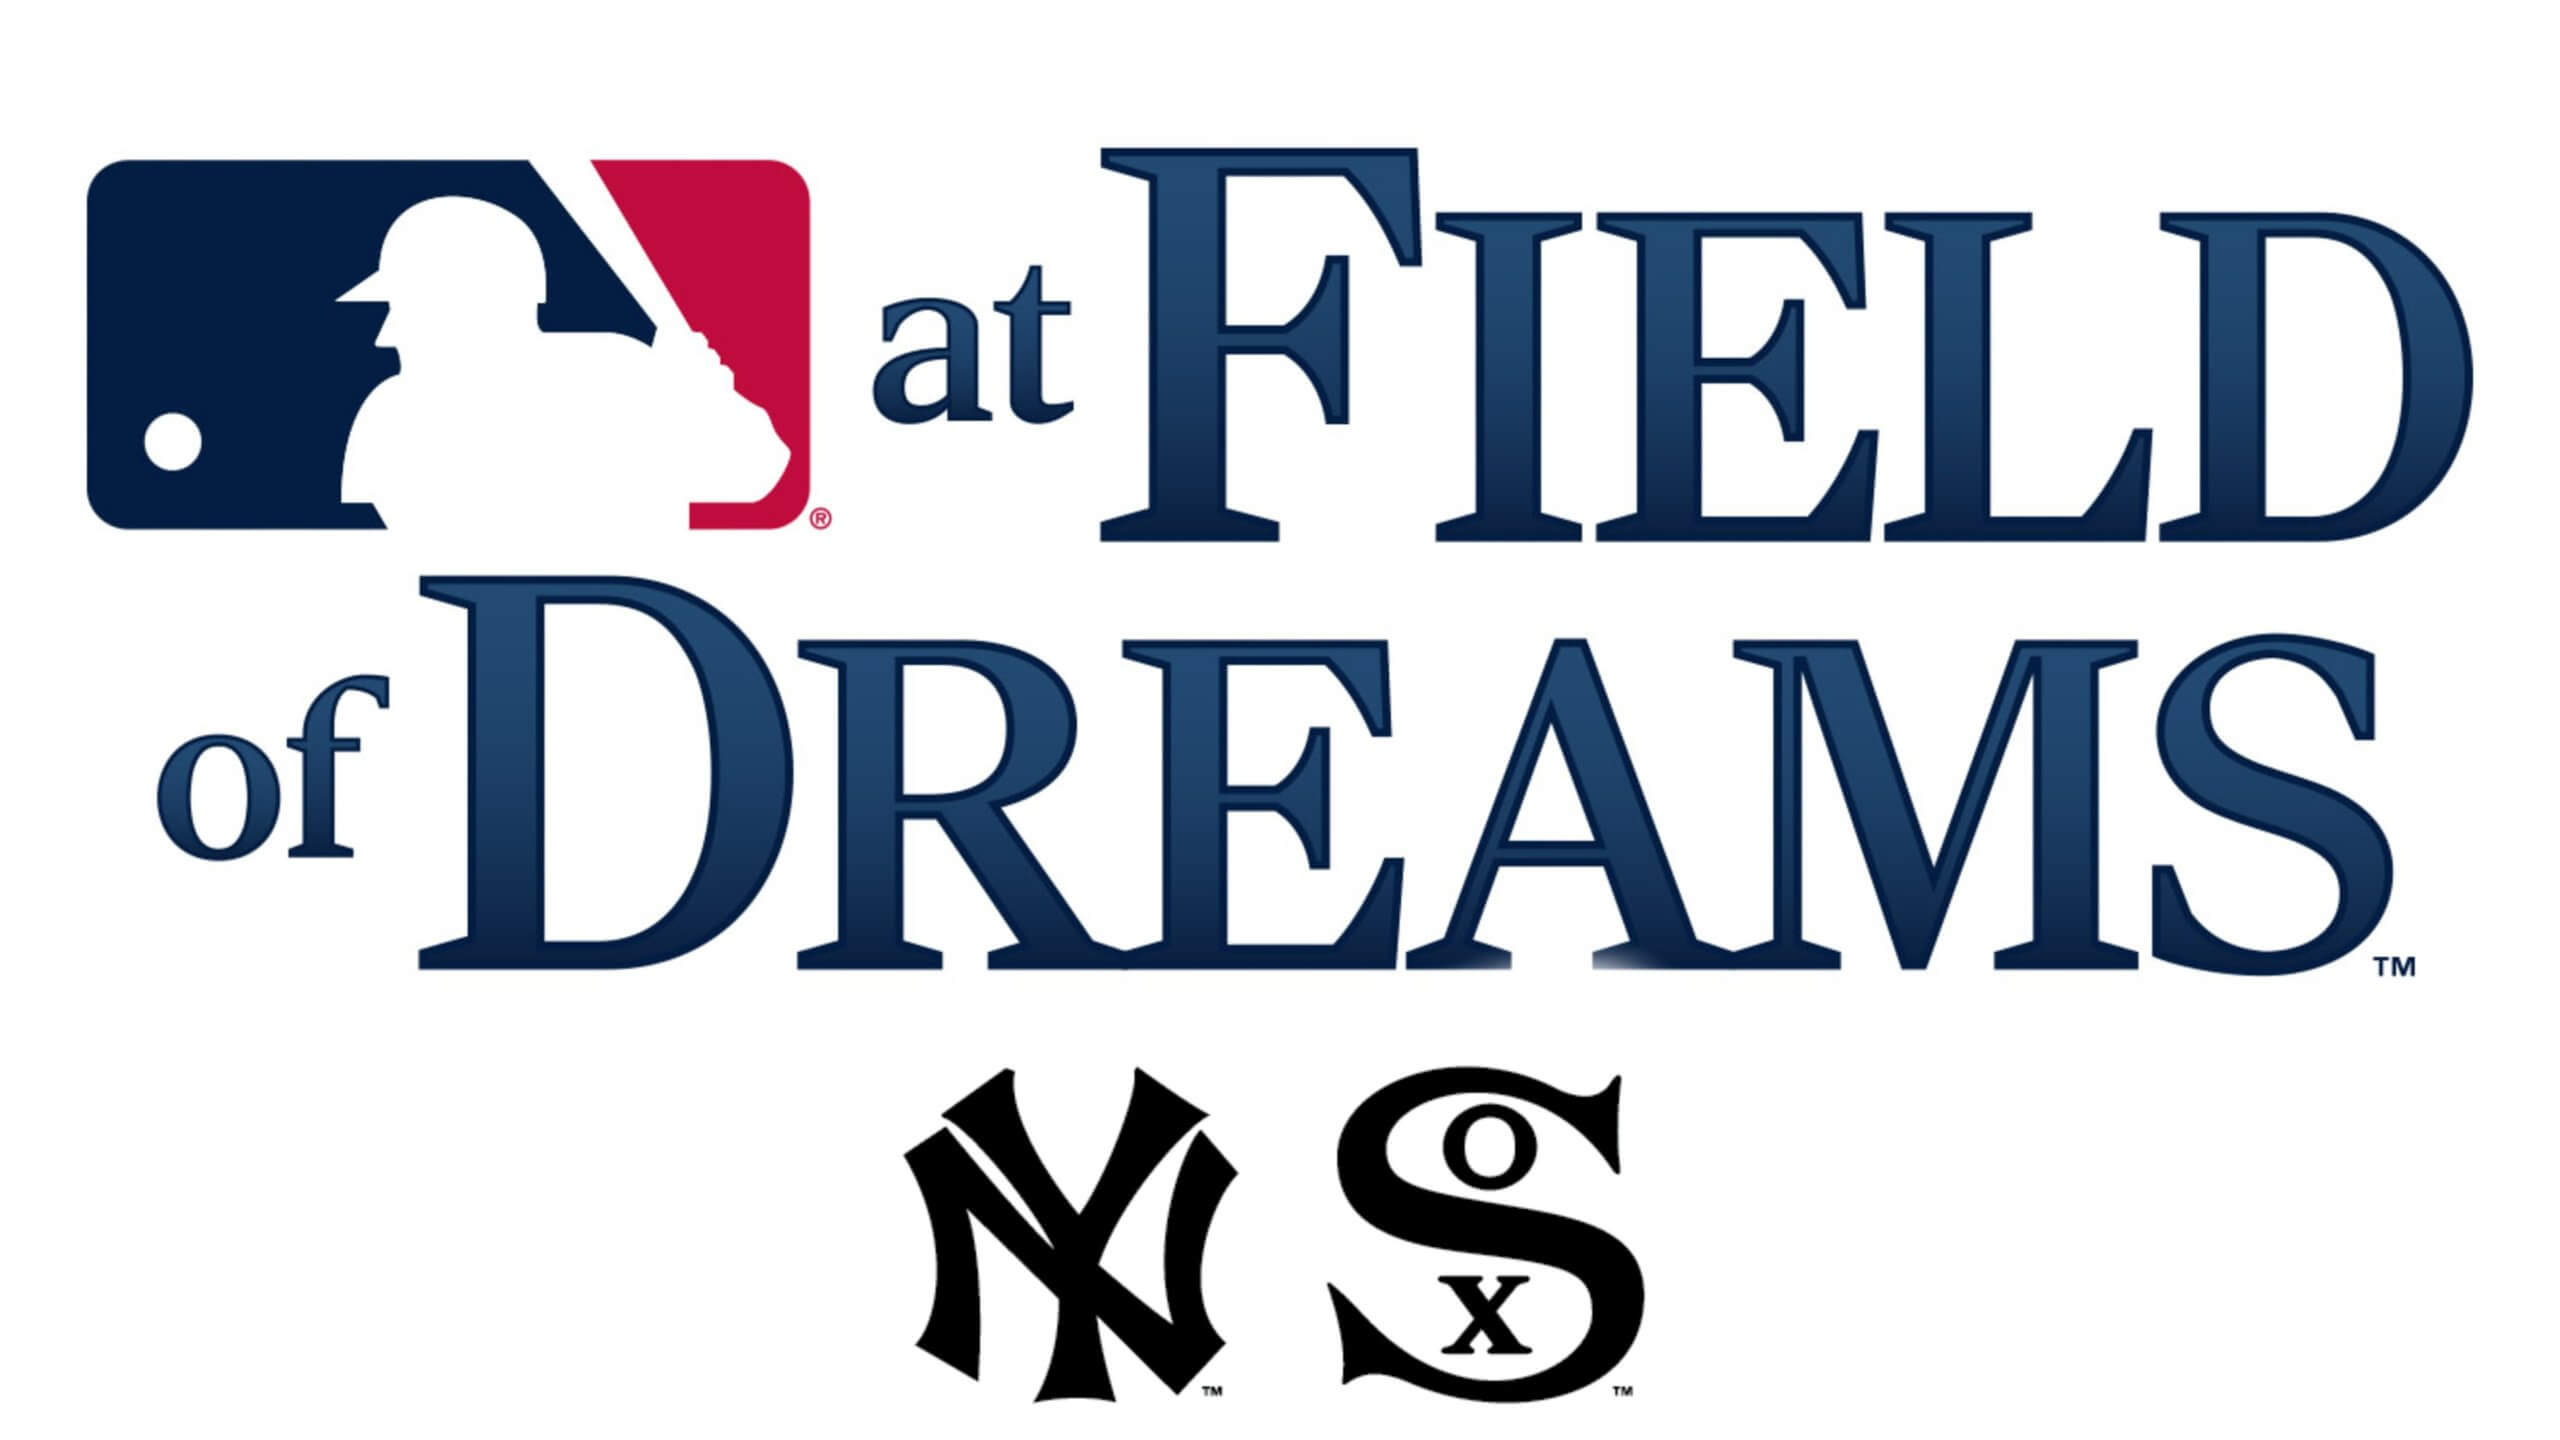 Chicago White Sox on X: The #WhiteSox are excited to partner with @MLB to  host the first-ever major-league game at the Field of Dreams in Iowa! This  game will be against the